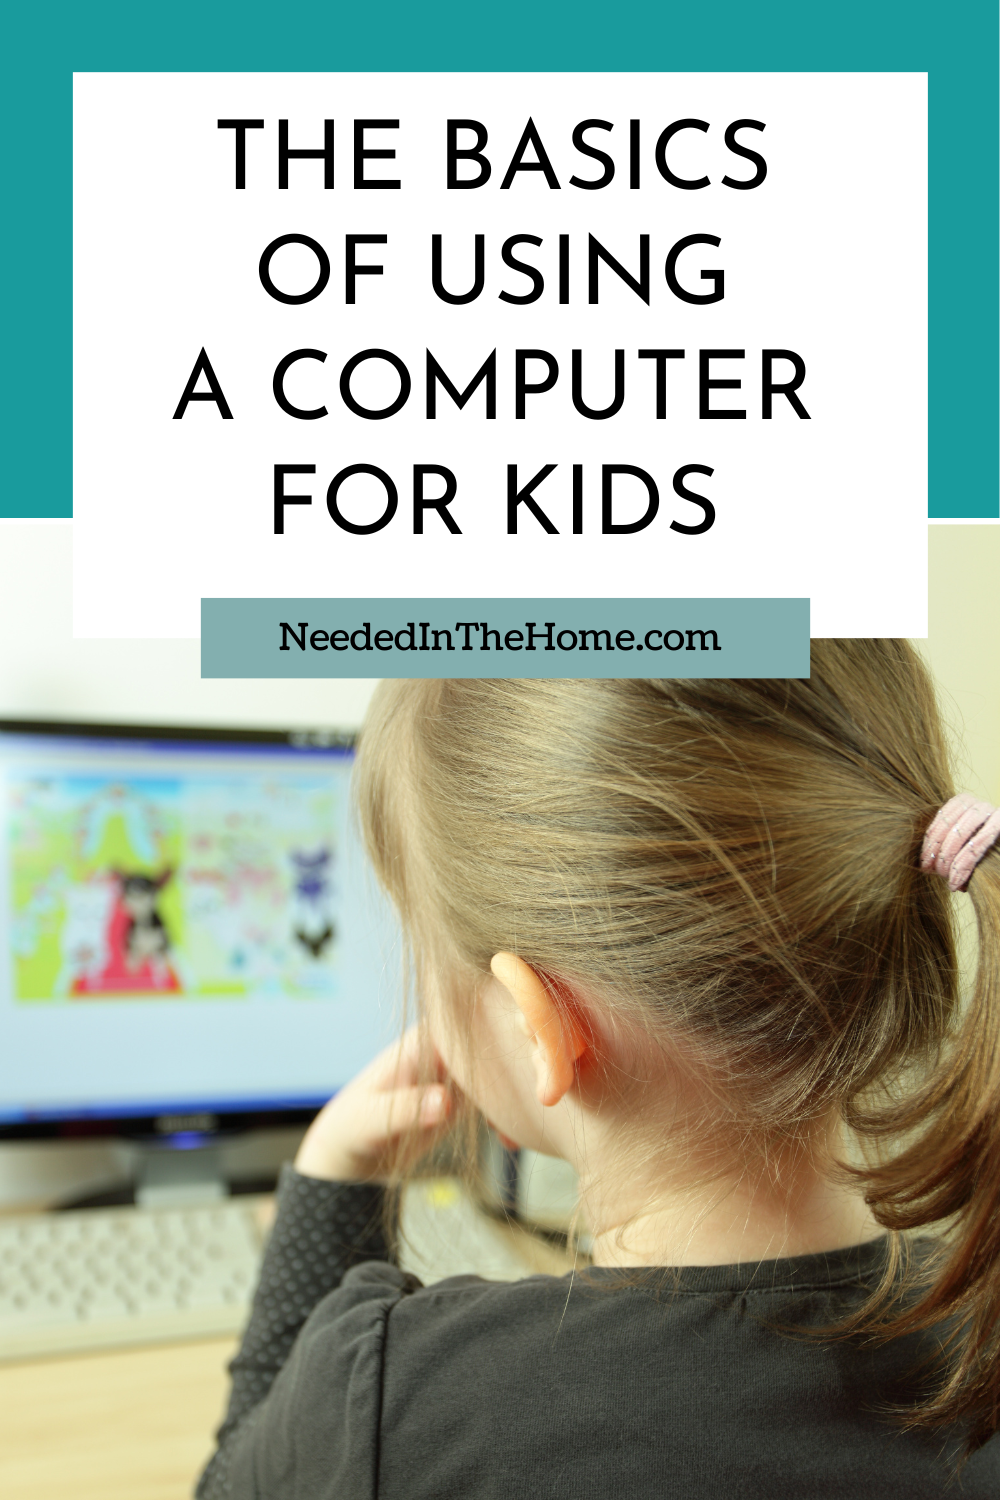 pinterest-pin-description the basics of using a computer for kids girl looking at computer screen neededinthehome